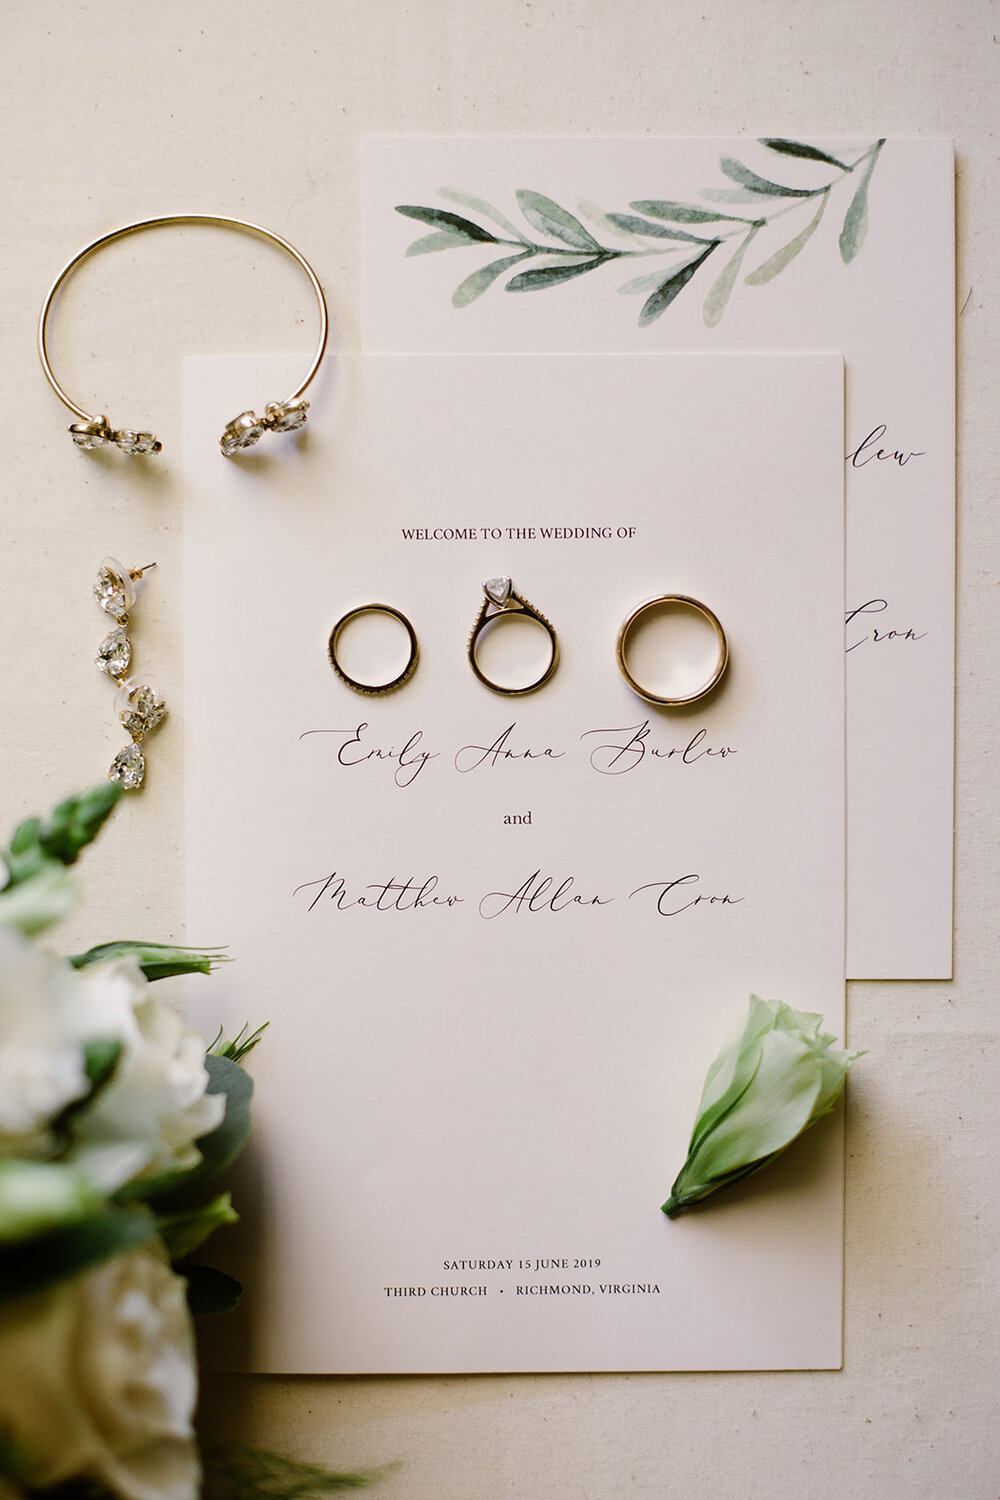  Wedding Details with Rings and Invitations | Sarah Mattozzi Photography | Ball Gown Wedding Dress and Black Tux | Outdoor Classic Wedding at Third Church and Veritas School | Richmond Wedding Photographer 